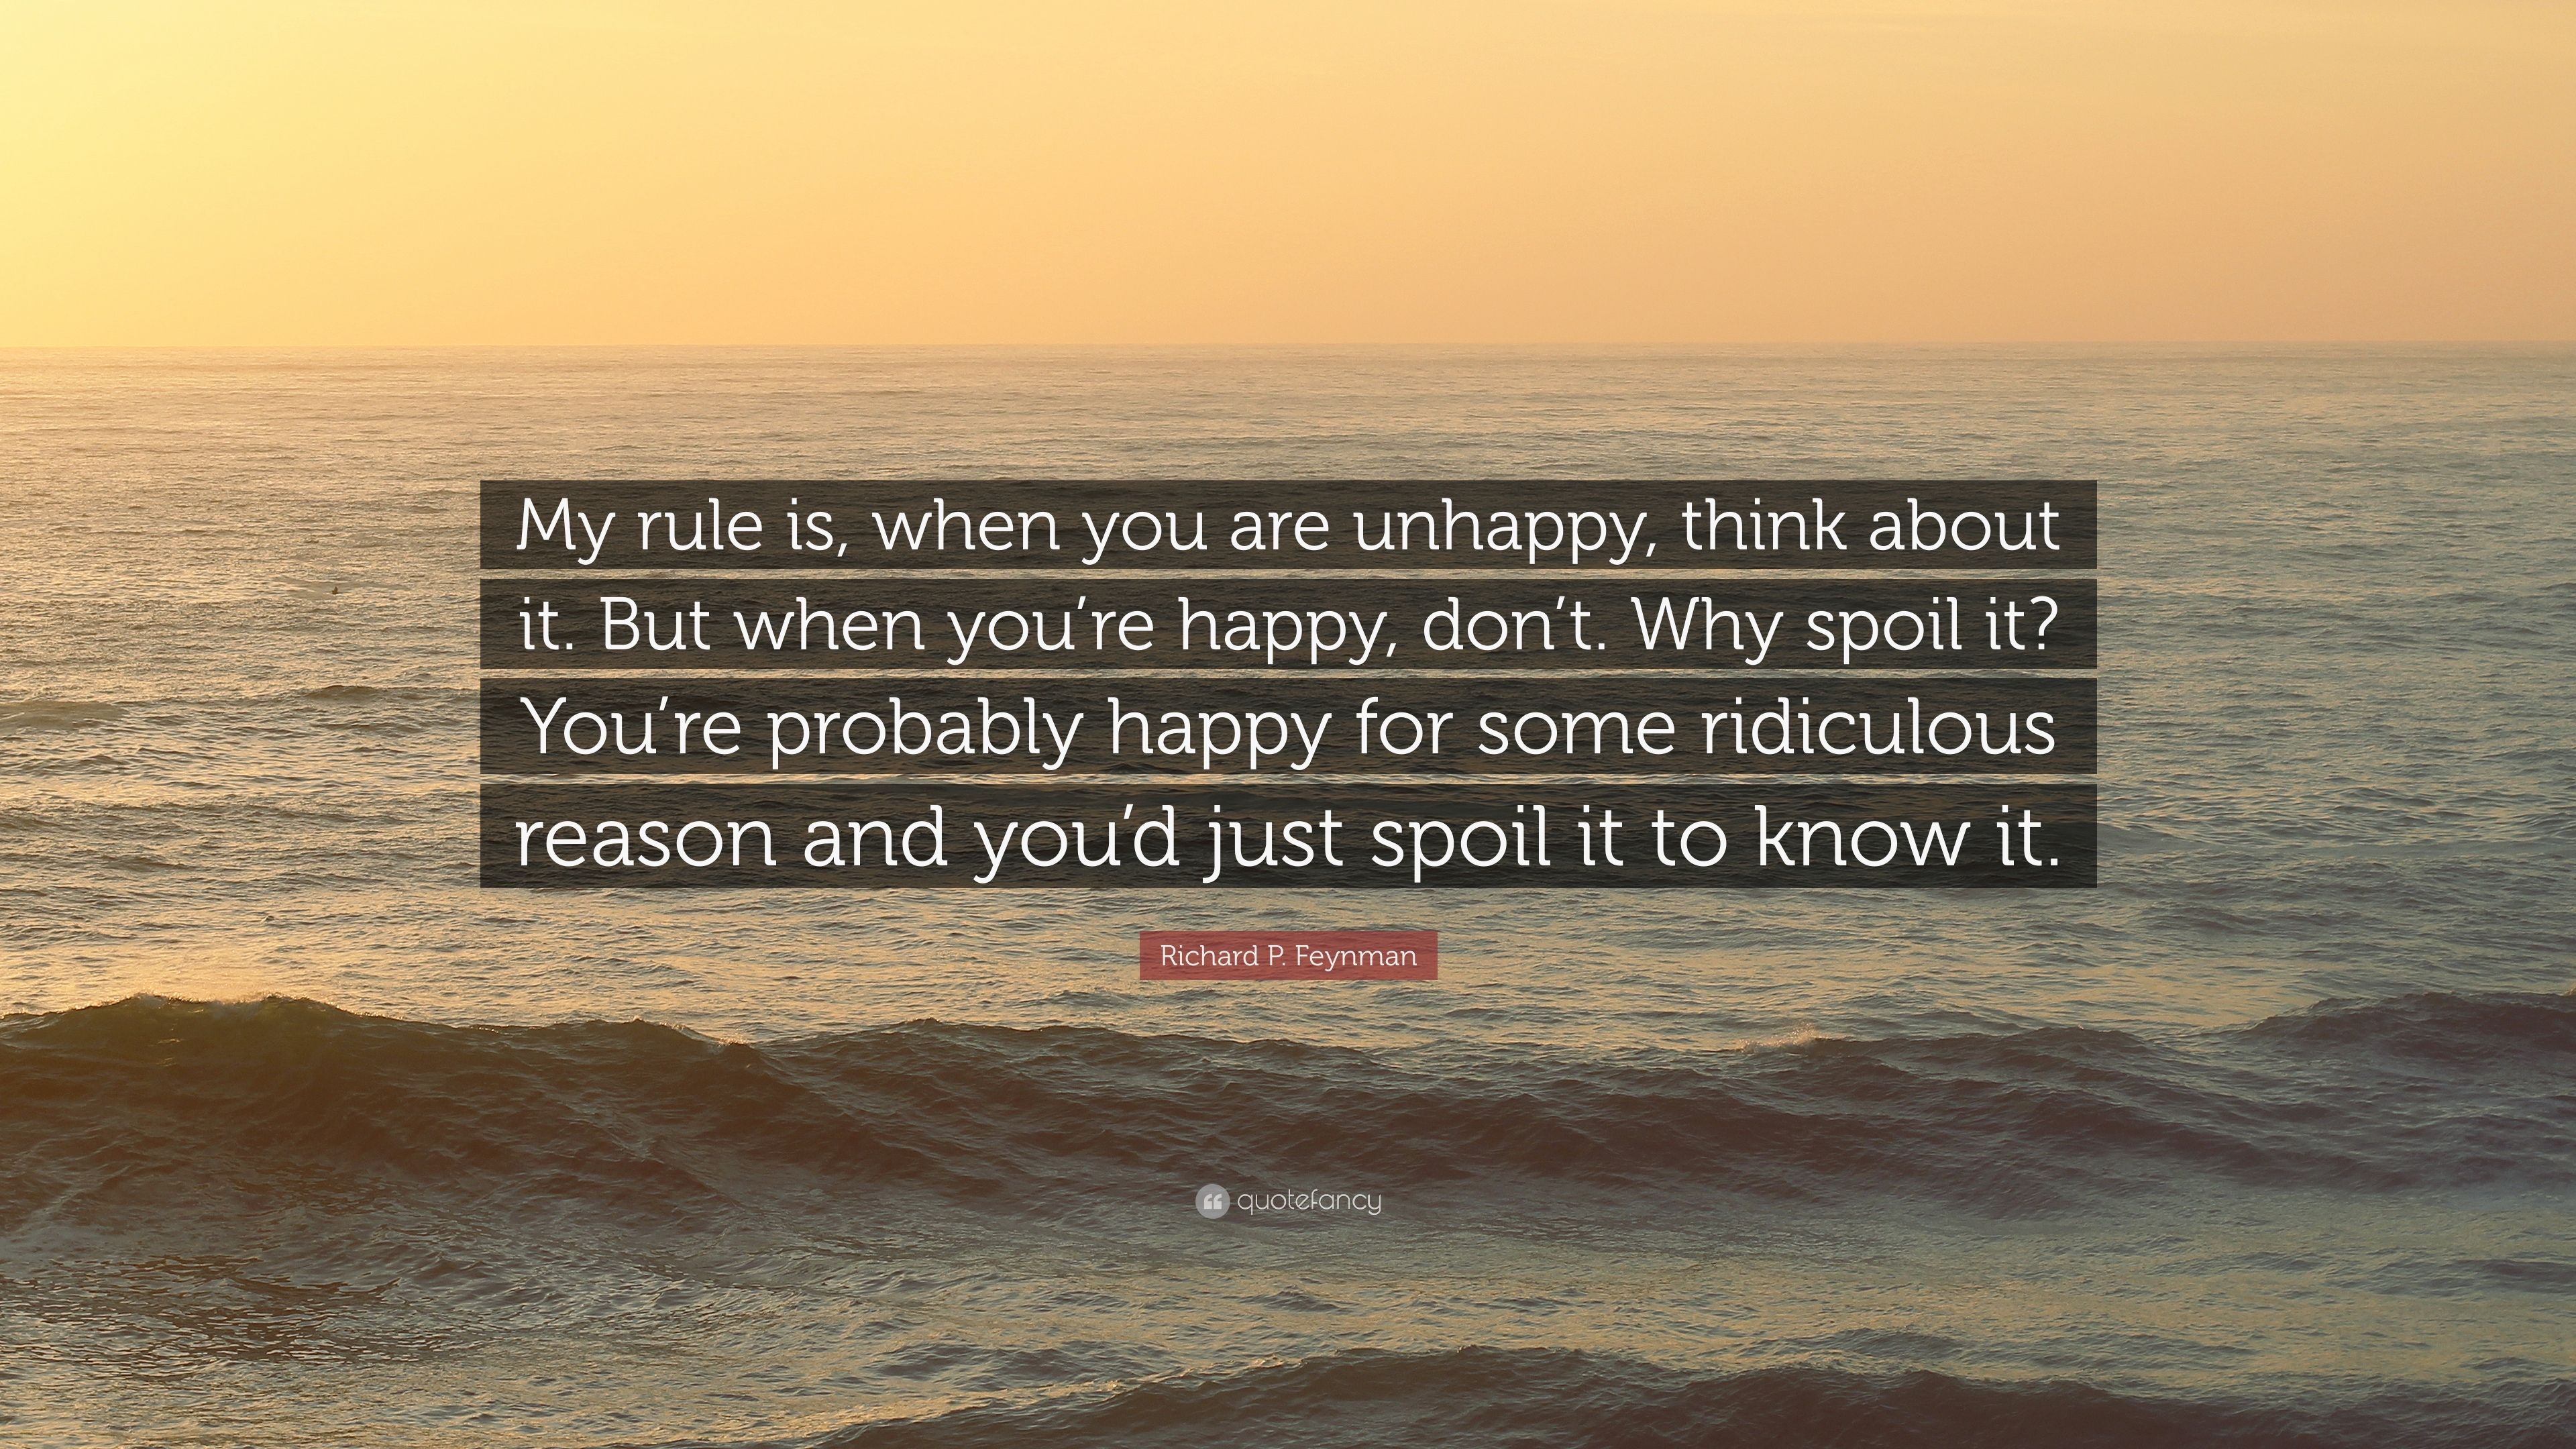 Richard P. Feynman Quote: “My rule is, when you are unhappy, think